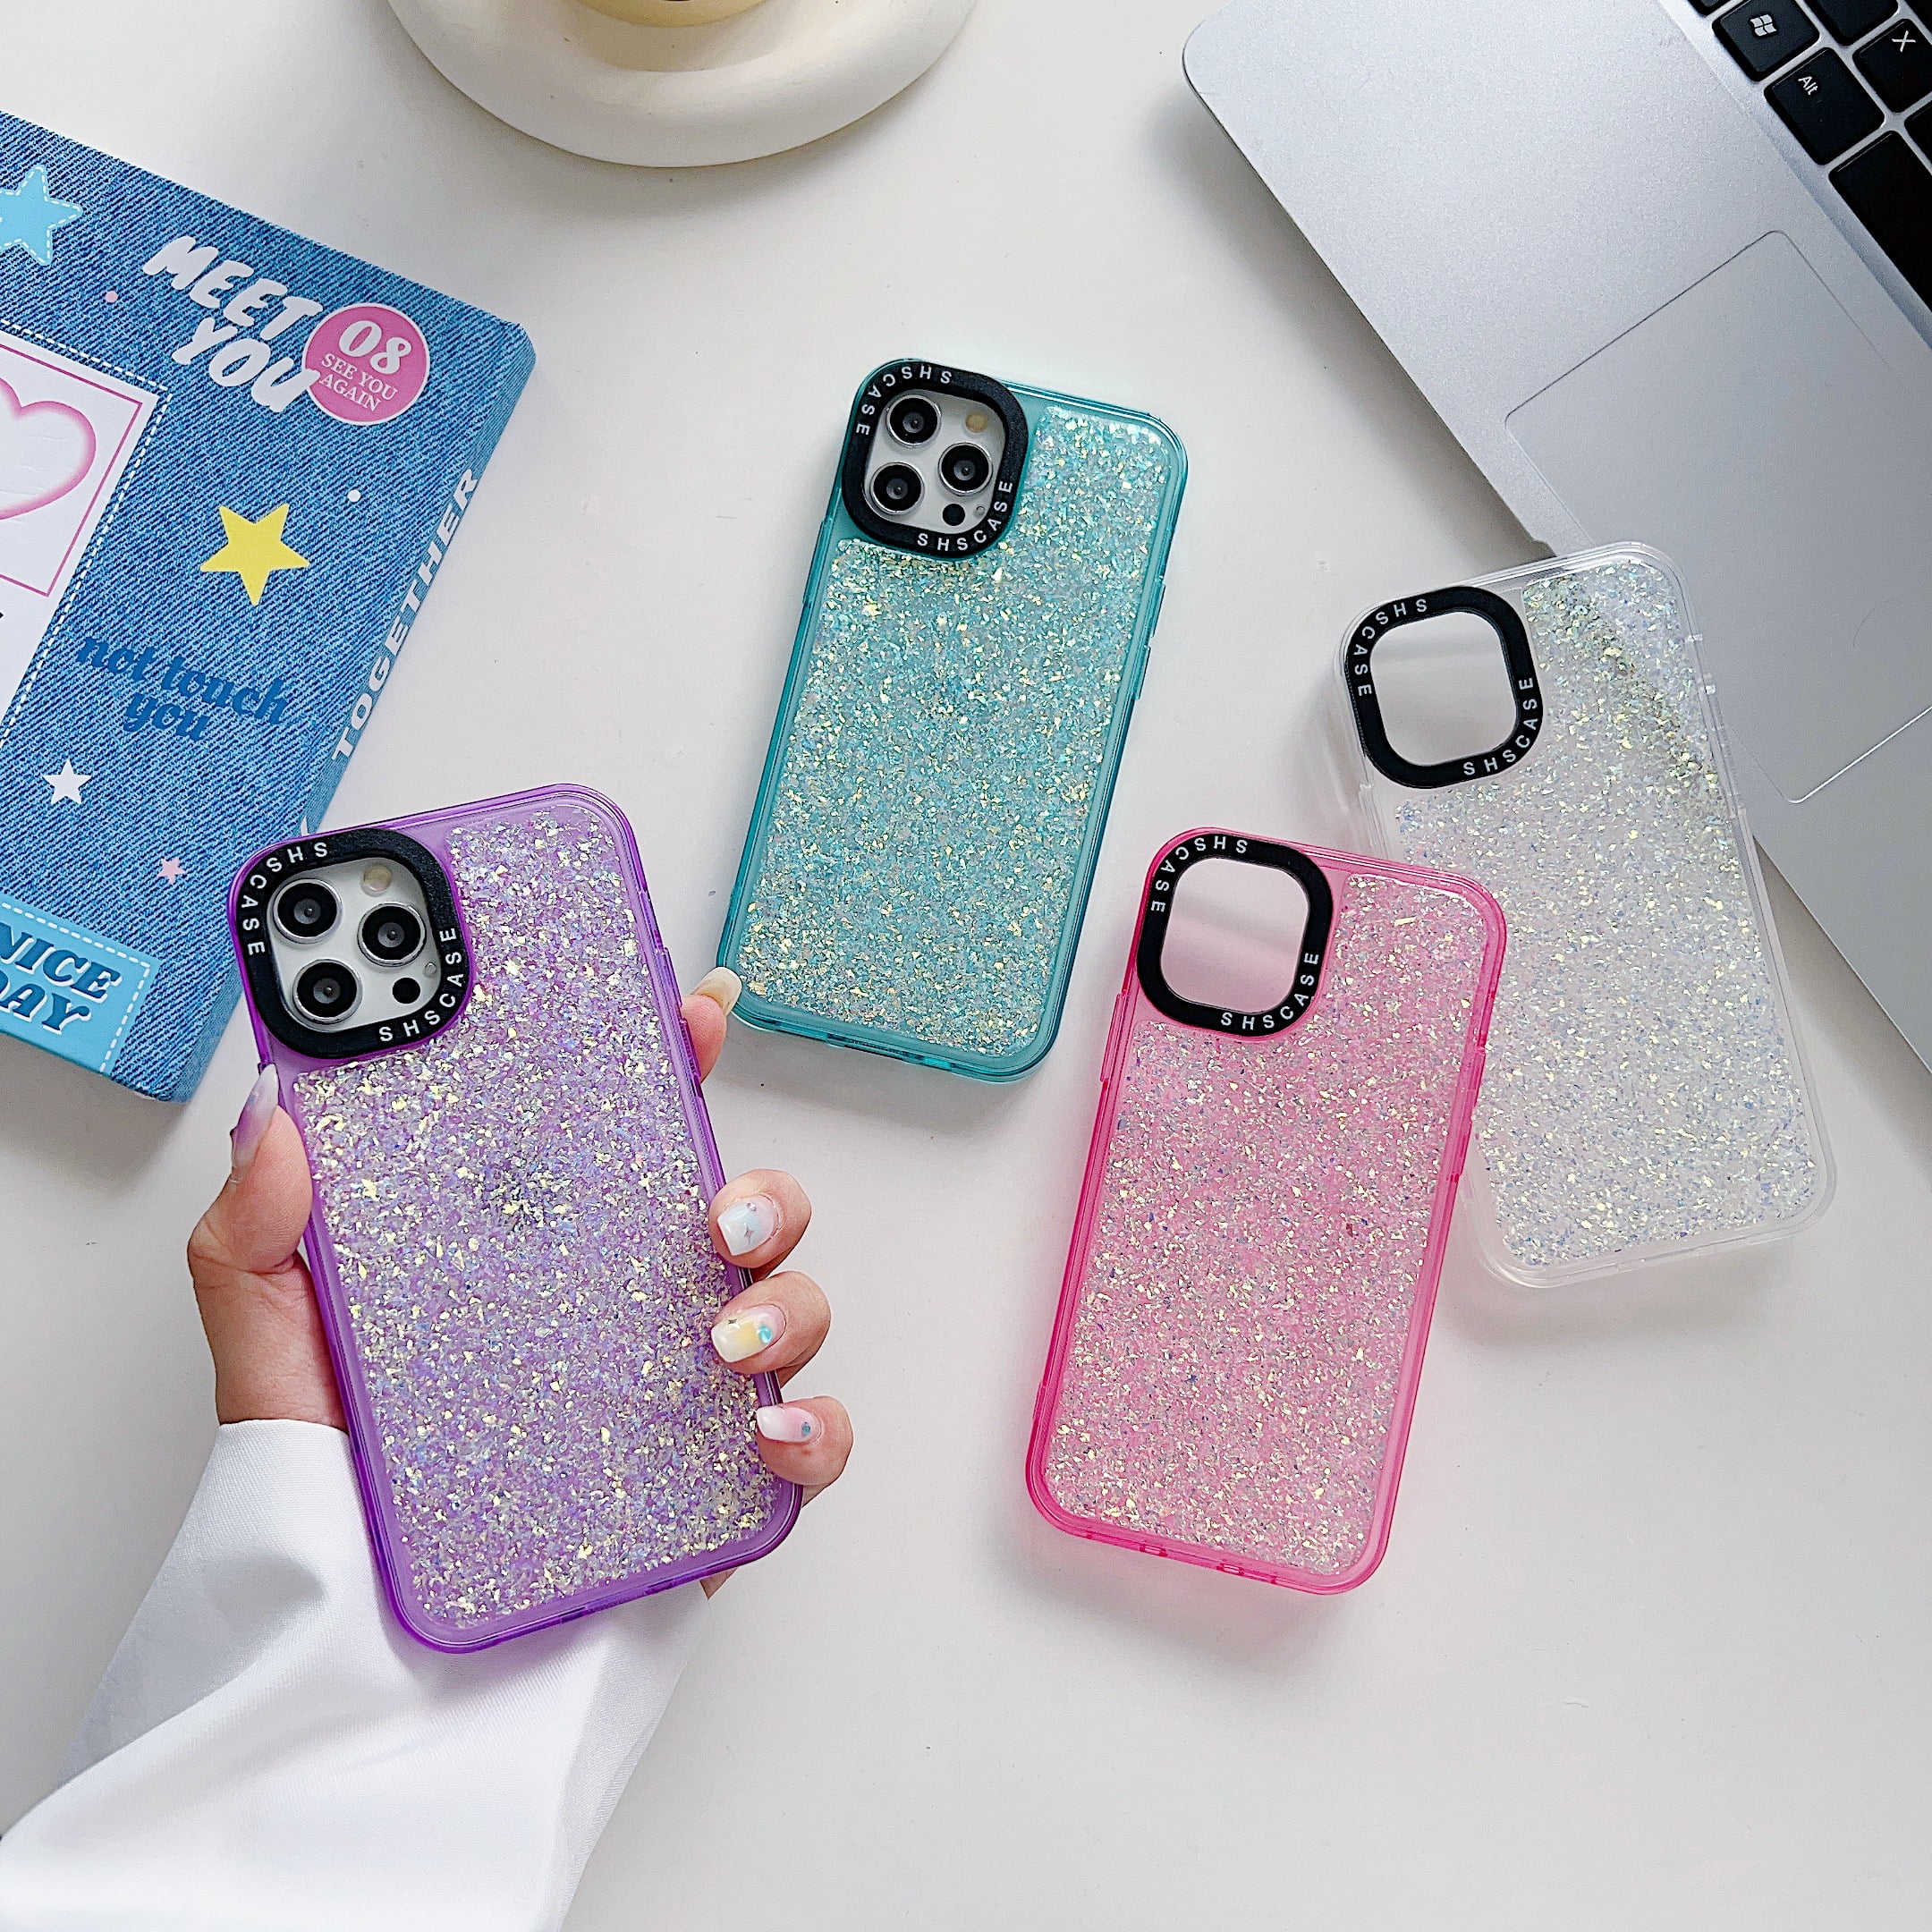  iPhone 15 Pro Max Case Cute Disney, iPhone 15 Pro Max Case for  Women, iPhone 15 Pro Max Case Clear with Design,，Slim Stylish Girly  Shockproof Anti-Yellowing PC+TPU Case for iPhone 15